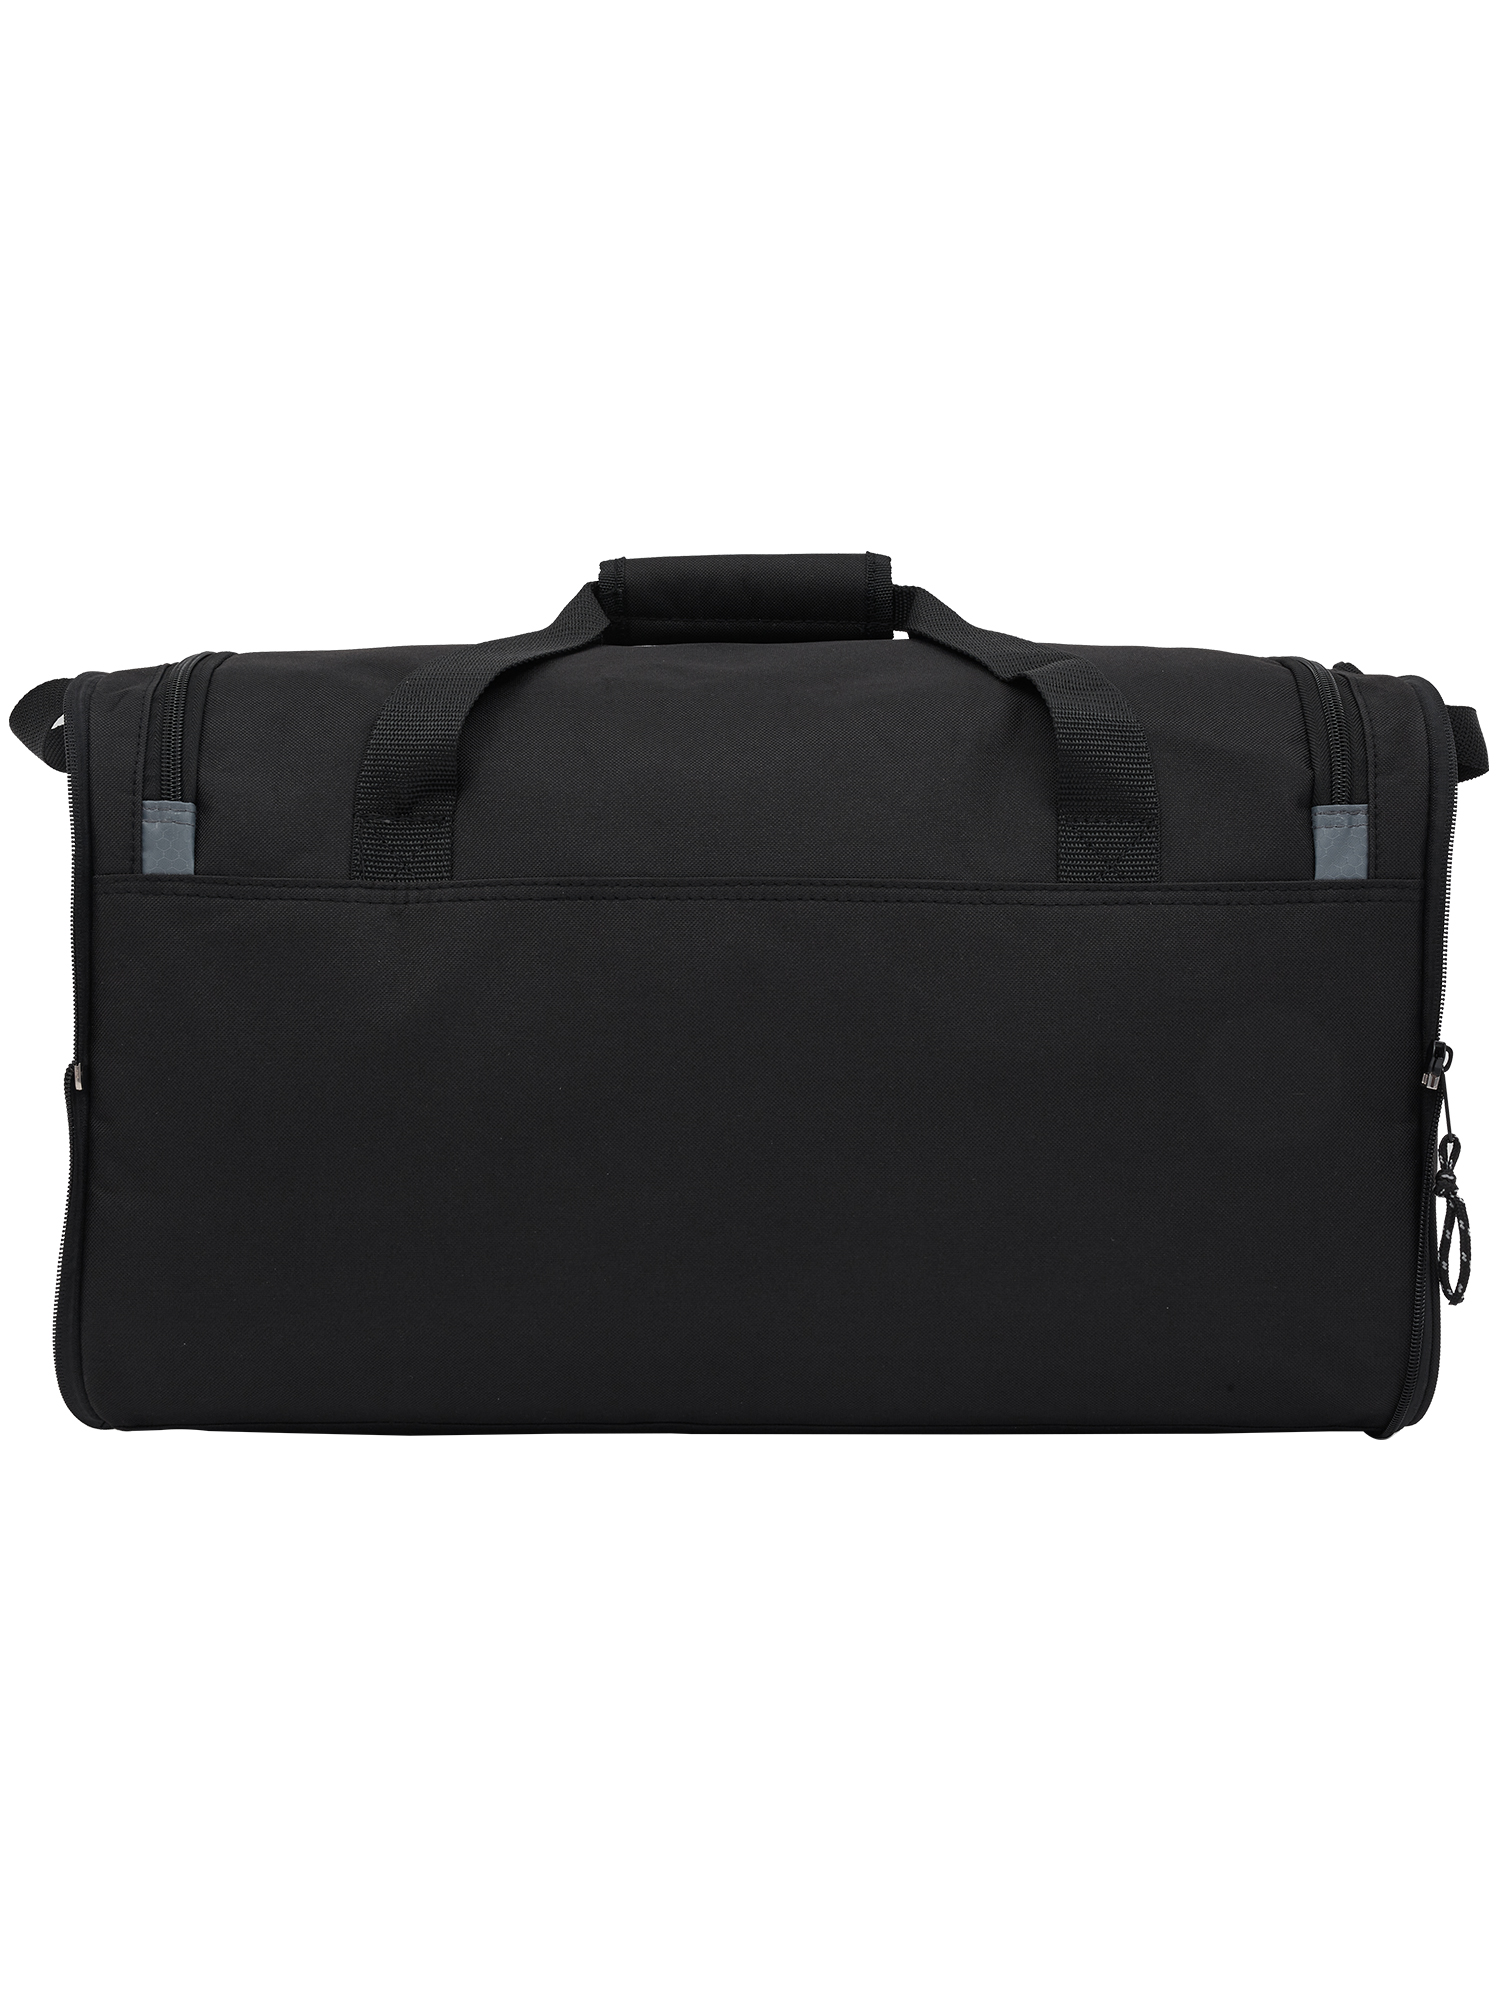 Protégé 20" Collapsible Sport and Travel Duffel Bag, Black - image 5 of 9